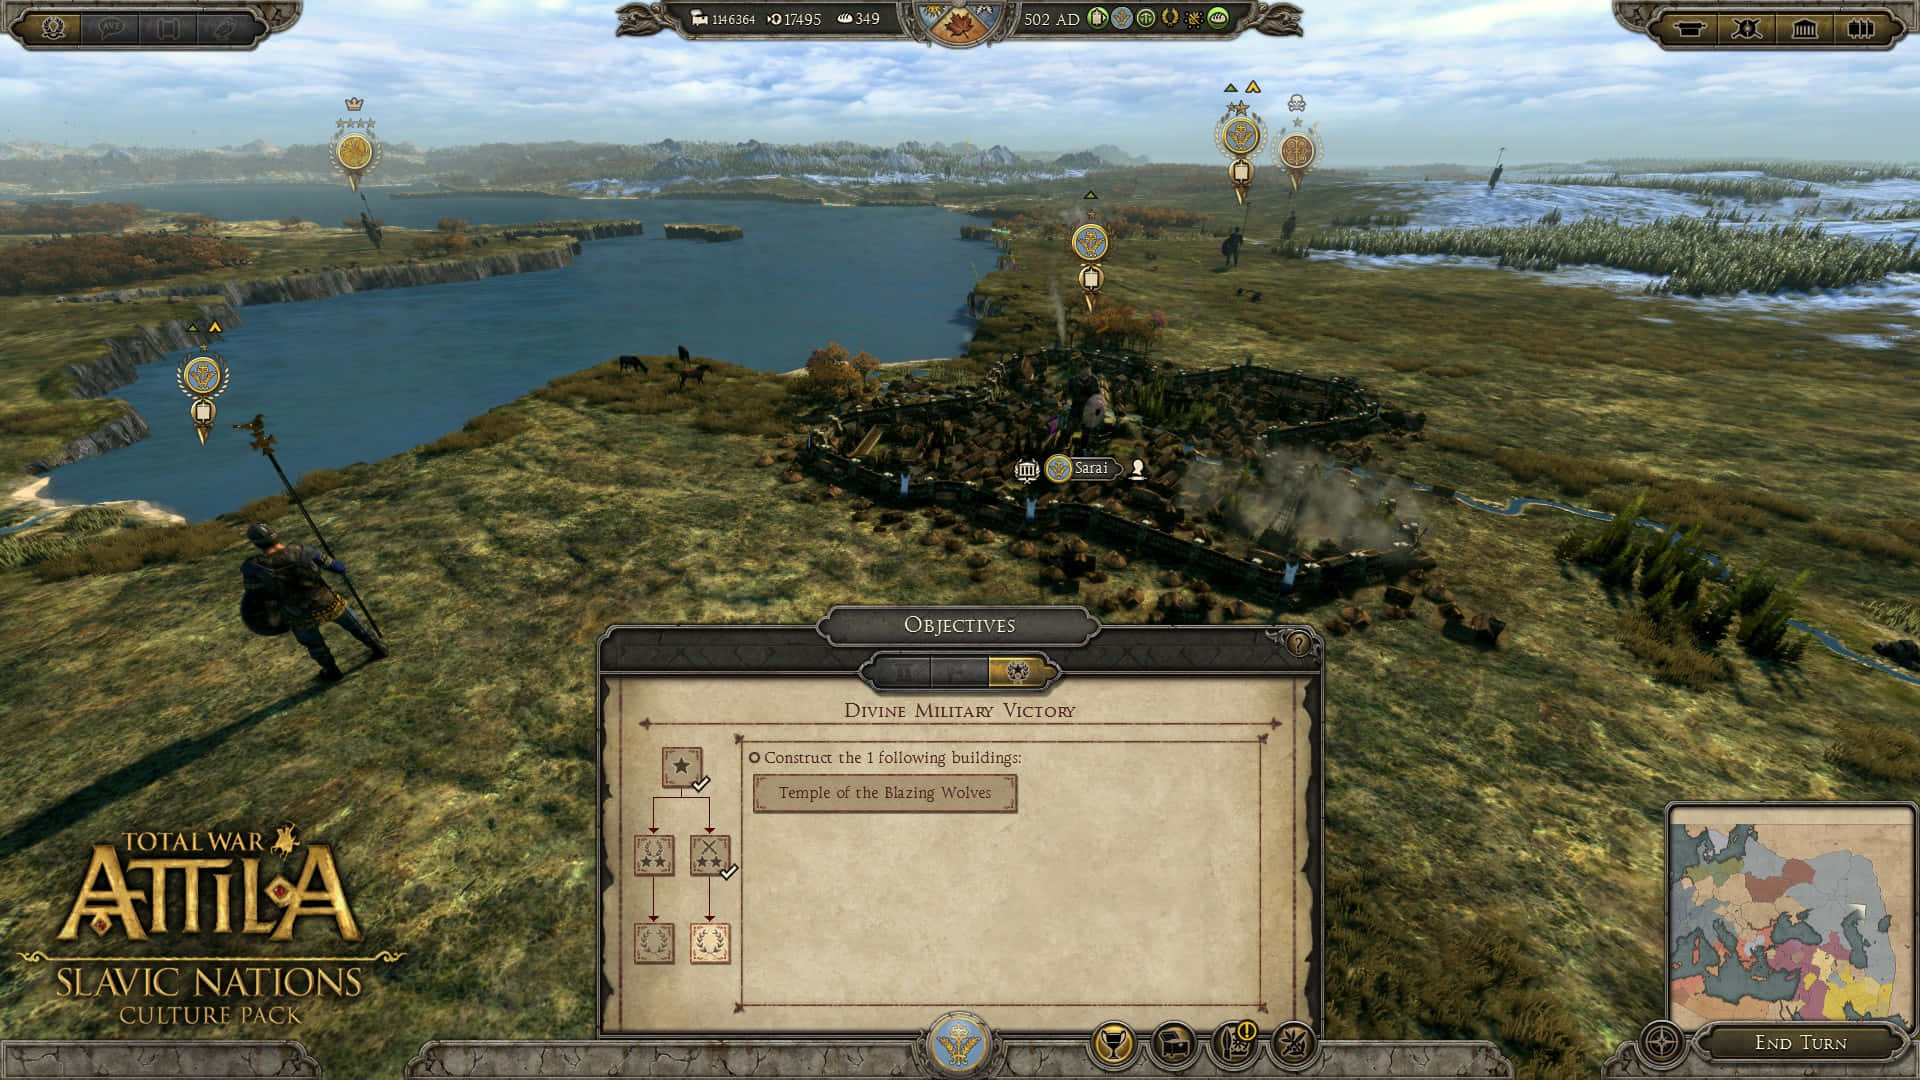 A Screenshot Of The Game Atlas Of The Ages